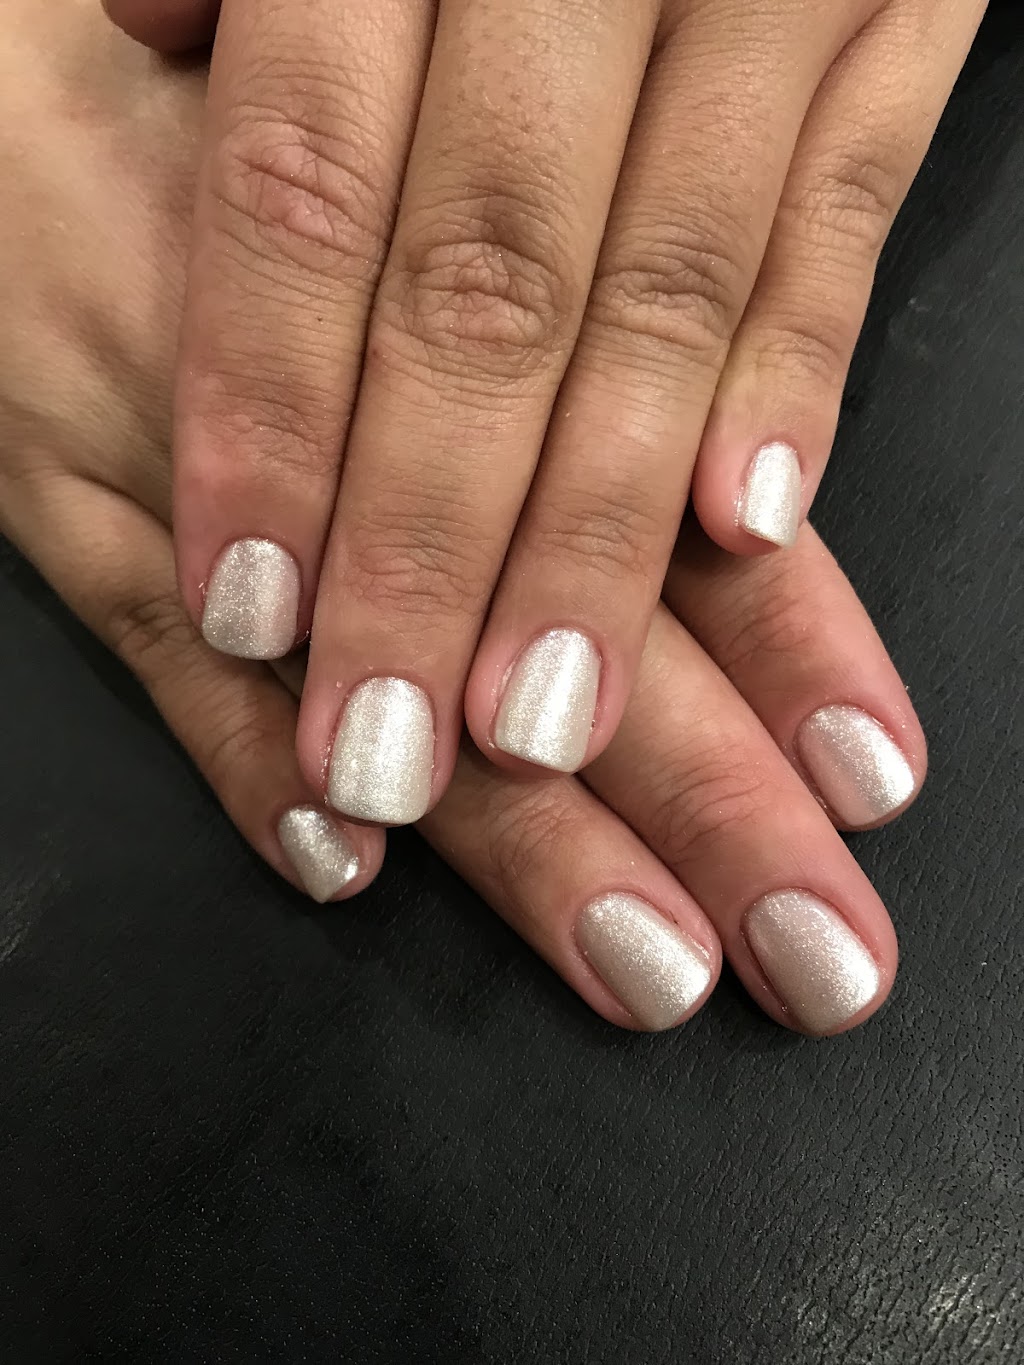 Nails For You | 475 High Mountain Rd, North Haledon, NJ 07508 | Phone: (973) 423-1112